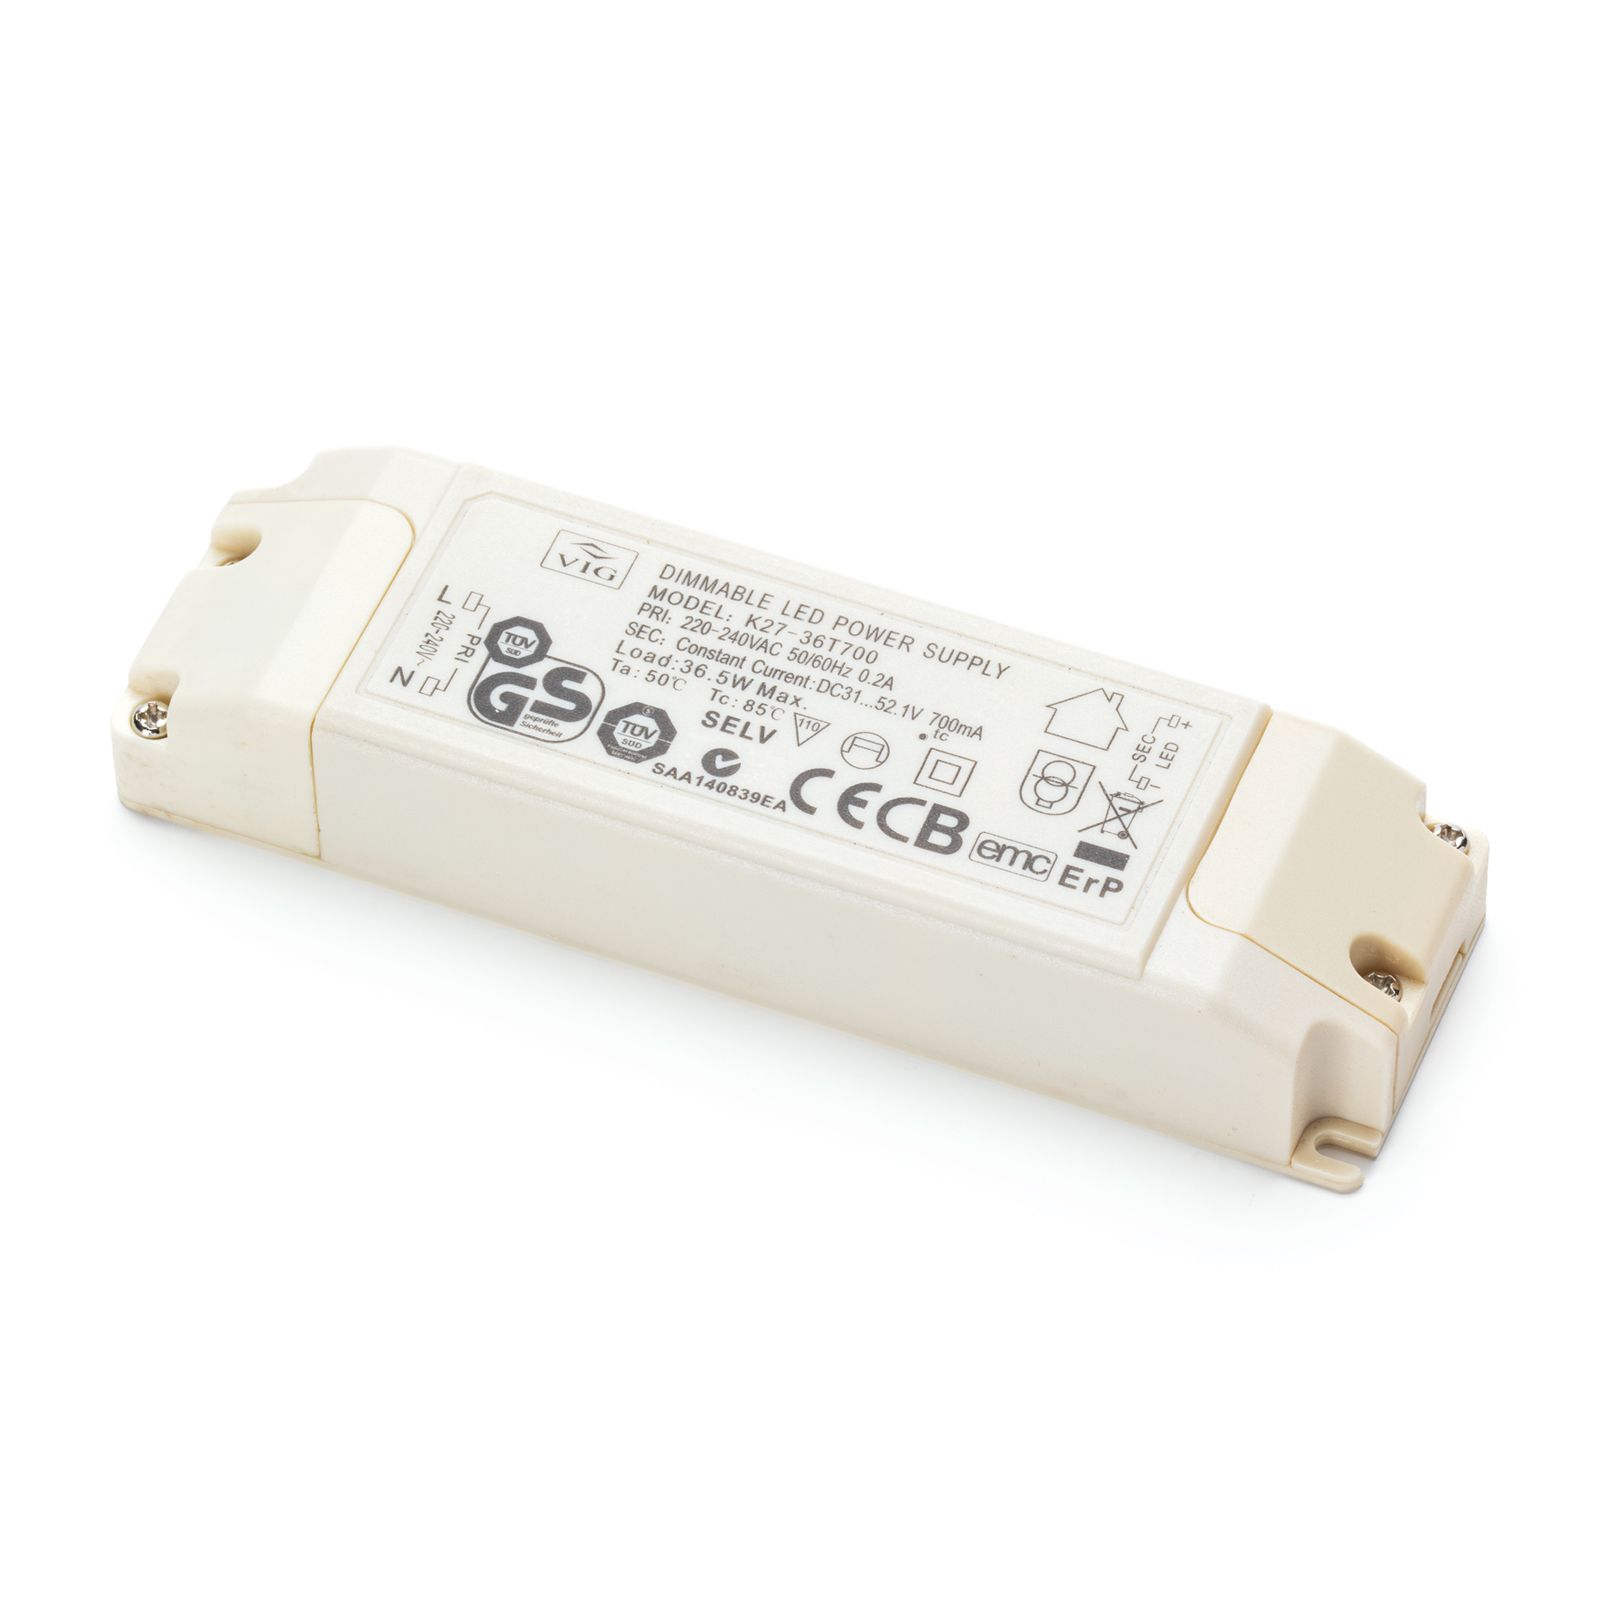 Buy LED DRIVER 48-60W 58-90V 600mA IP65 in ABCLED store for 18.90 €